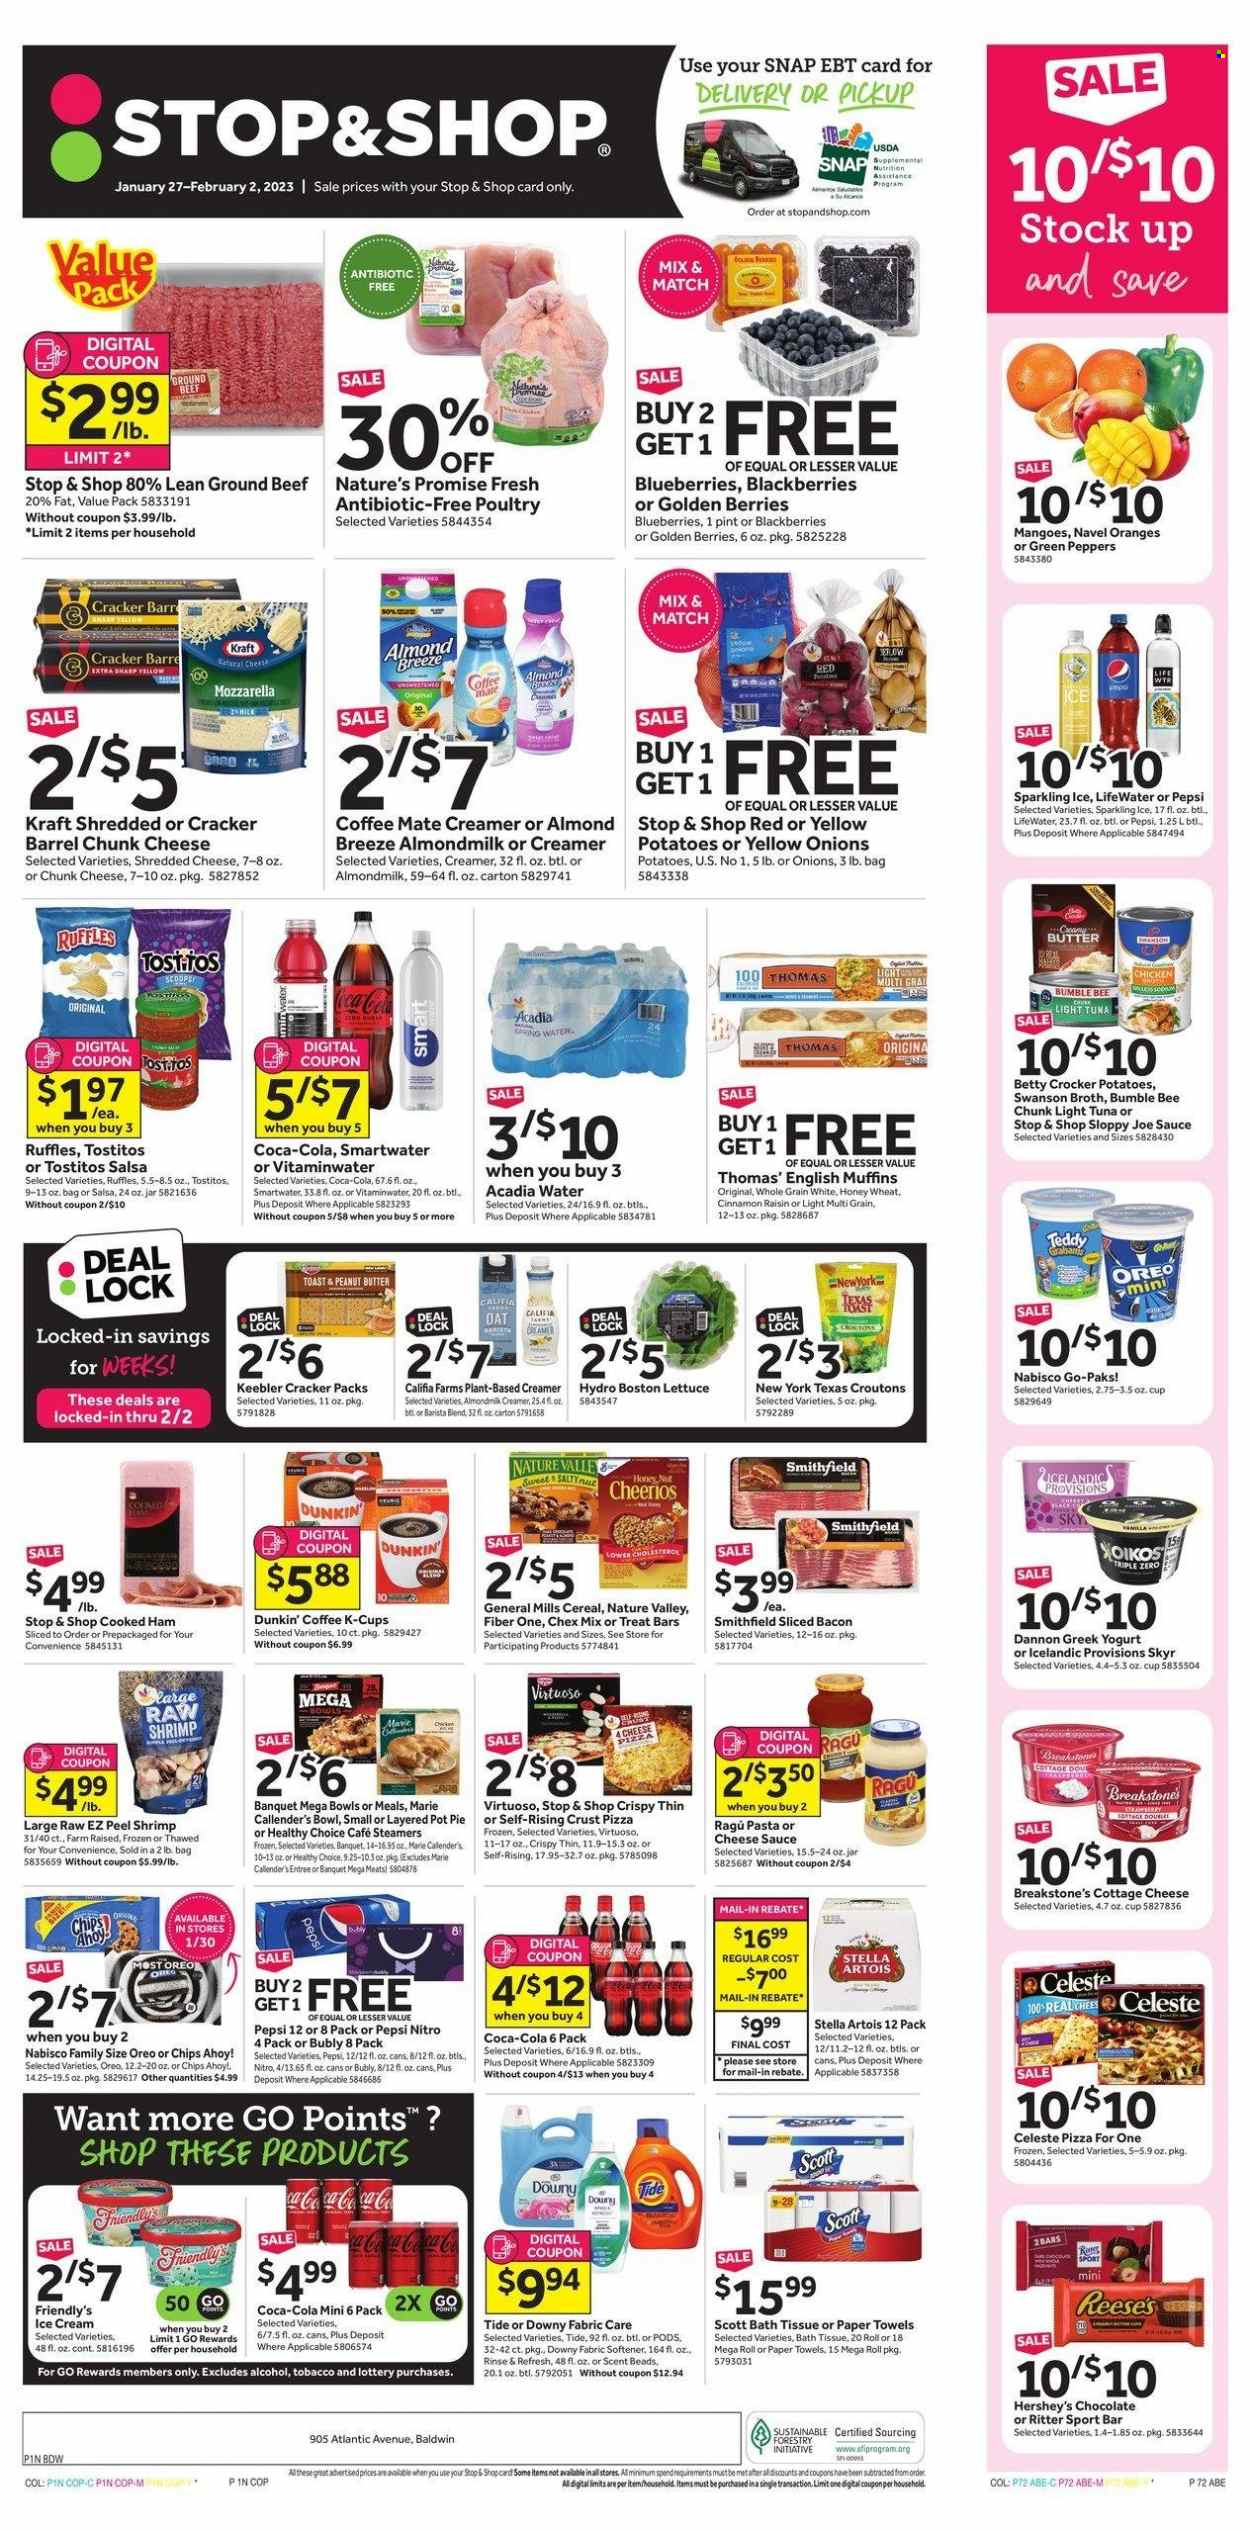 thumbnail - Stop & Shop Flyer - 01/27/2023 - 02/02/2023 - Sales products - english muffins, pie, Nature’s Promise, pot pie, potatoes, lettuce, peppers, blackberries, blueberries, mango, oranges, beef meat, ground beef, tuna, shrimps, pizza, Bumble Bee, sauce, Healthy Choice, Marie Callender's, Kraft®, ragú pasta, bacon, cooked ham, ham, cottage cheese, shredded cheese, chunk cheese, greek yoghurt, yoghurt, Dannon, almond milk, Coffee-Mate, milk, Almond Breeze, creamer, ice cream, Reese's, Hershey's, Friendly's Ice Cream, Celeste, crackers, Ritter Sport, Chips Ahoy!, Keebler, Ruffles, Tostitos, Chex Mix, croutons, broth, light tuna, cereals, Cheerios, Nature Valley, Fiber One, salsa, ragu, peanut butter, Coca-Cola, Pepsi, spring water, Acadia, Smartwater, coffee capsules, K-Cups, beer, Stella Artois, bath tissue, Scott, kitchen towels, paper towels, Tide, fabric softener, Downy Laundry, bowl, pin, pot, navel oranges. Page 1.